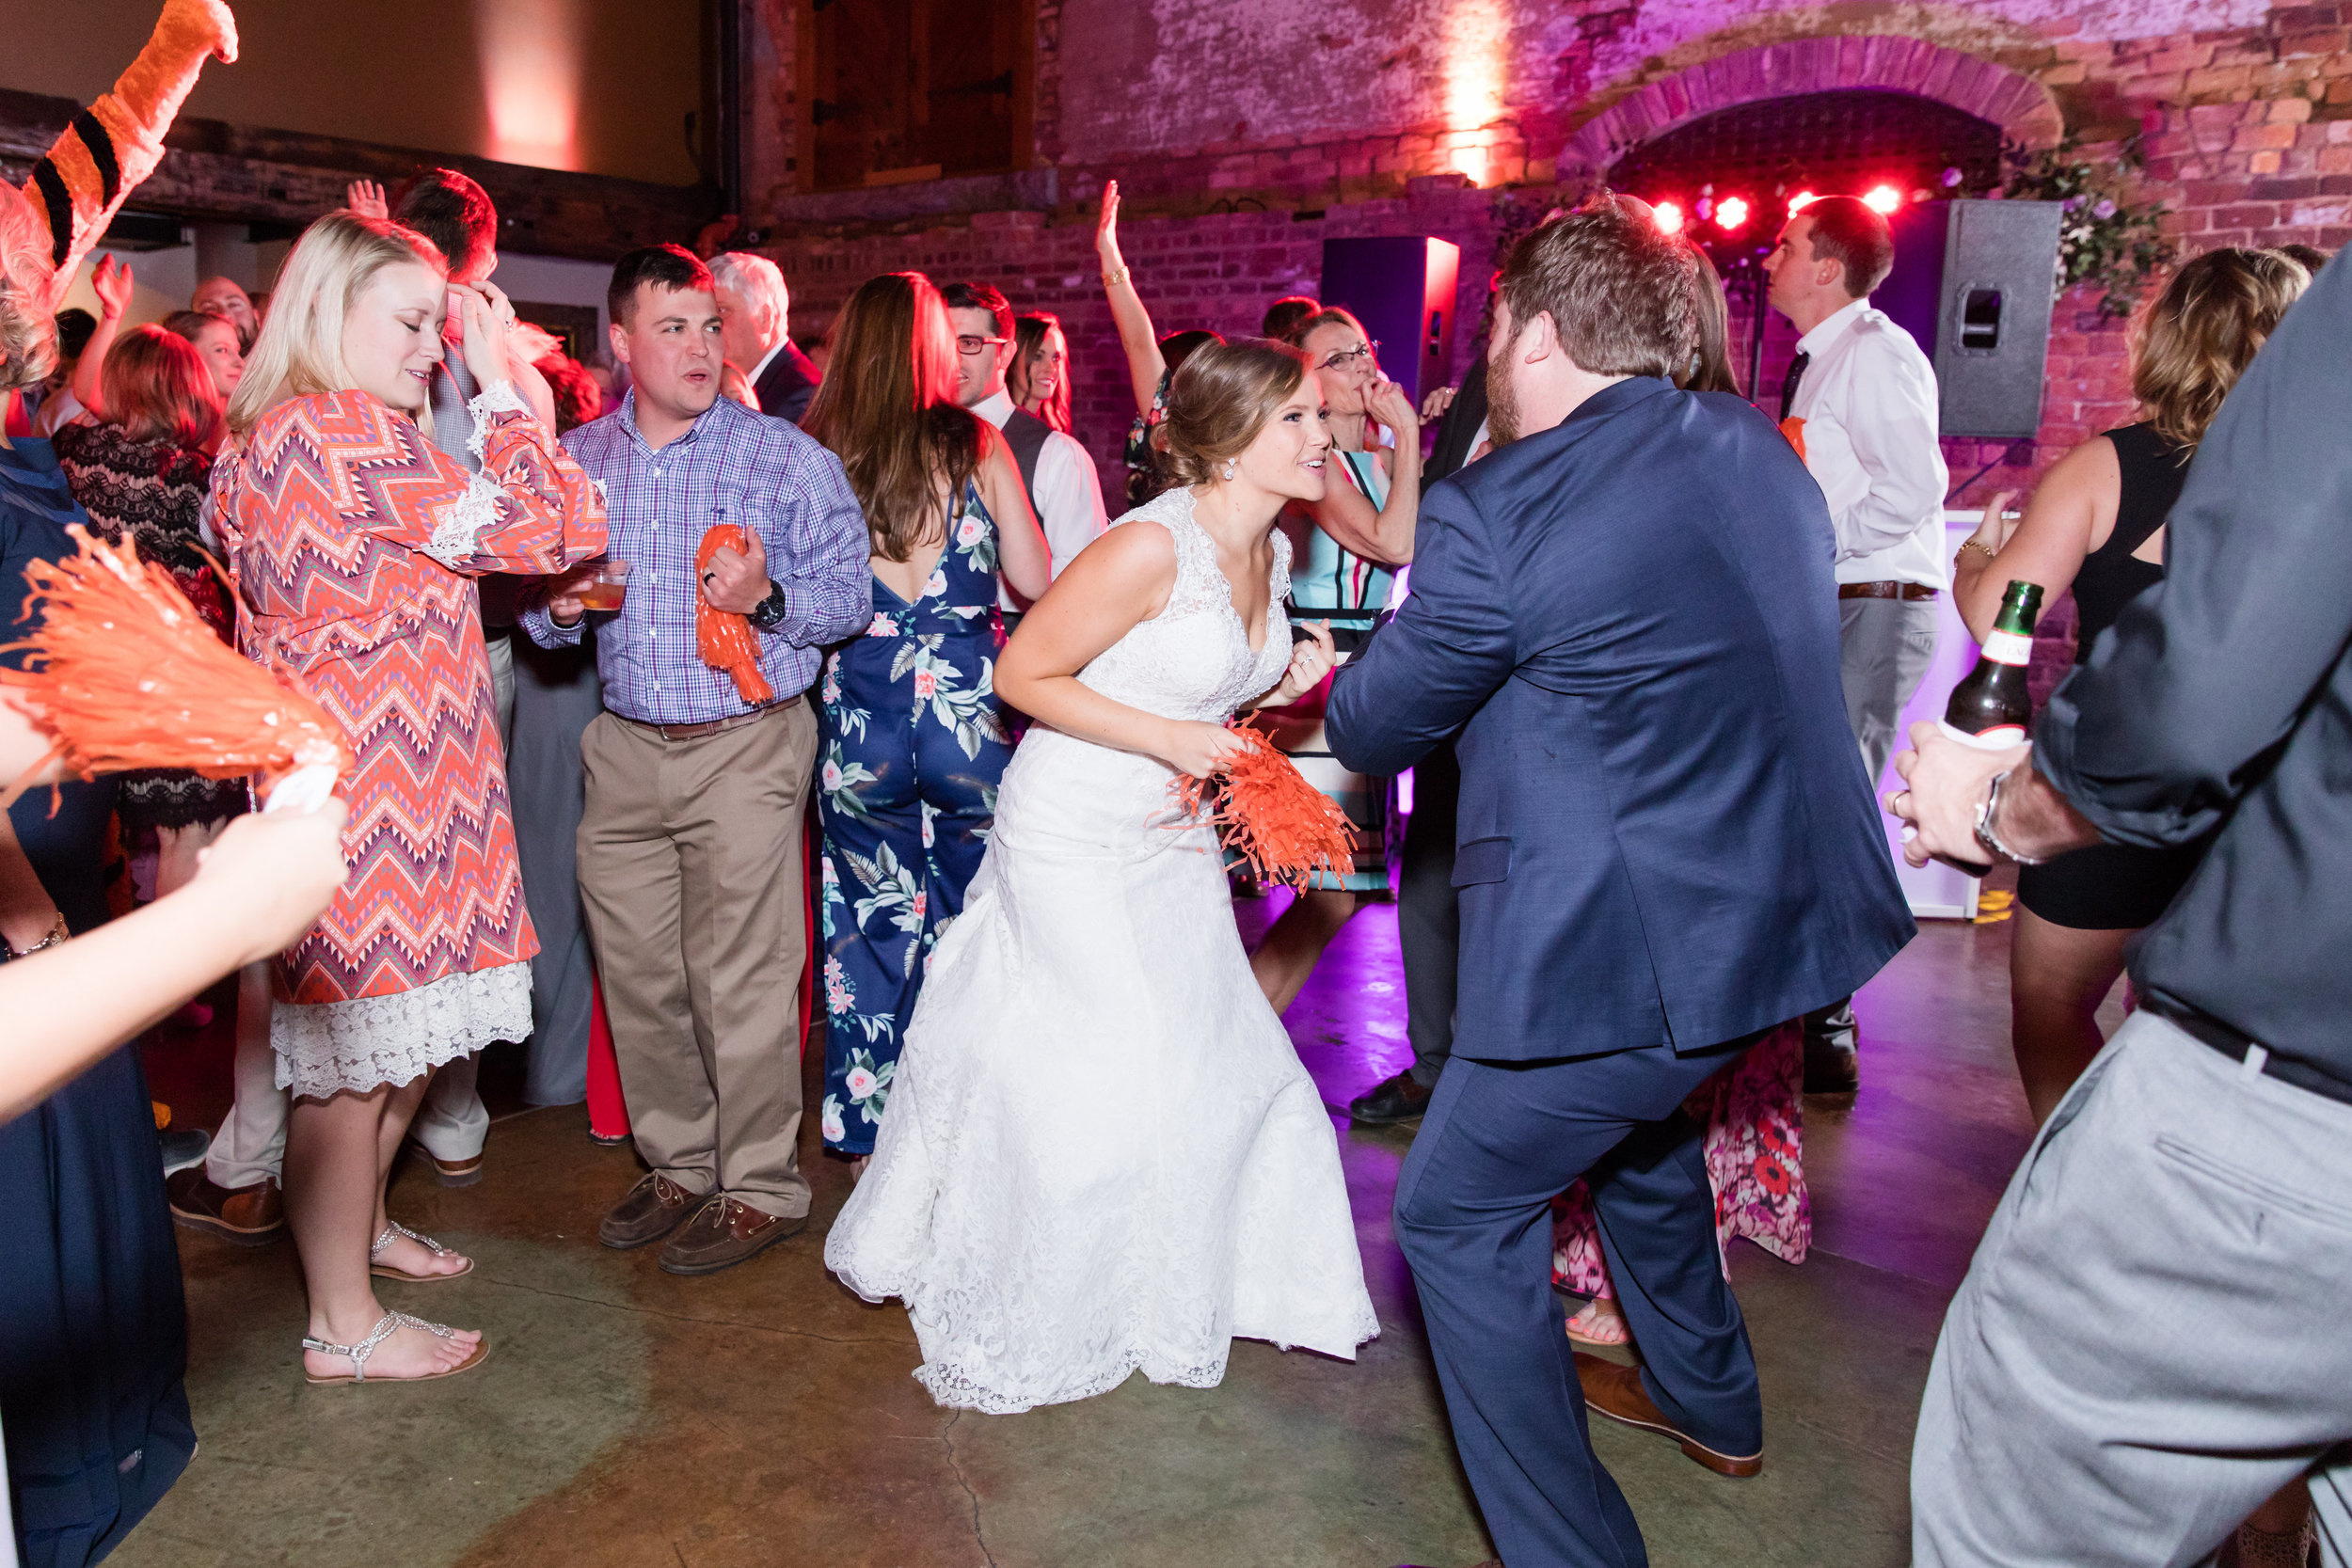  Packing dance floors…it’s our thing! Megan and Ben had such a fun wedding DJ with Chris. 